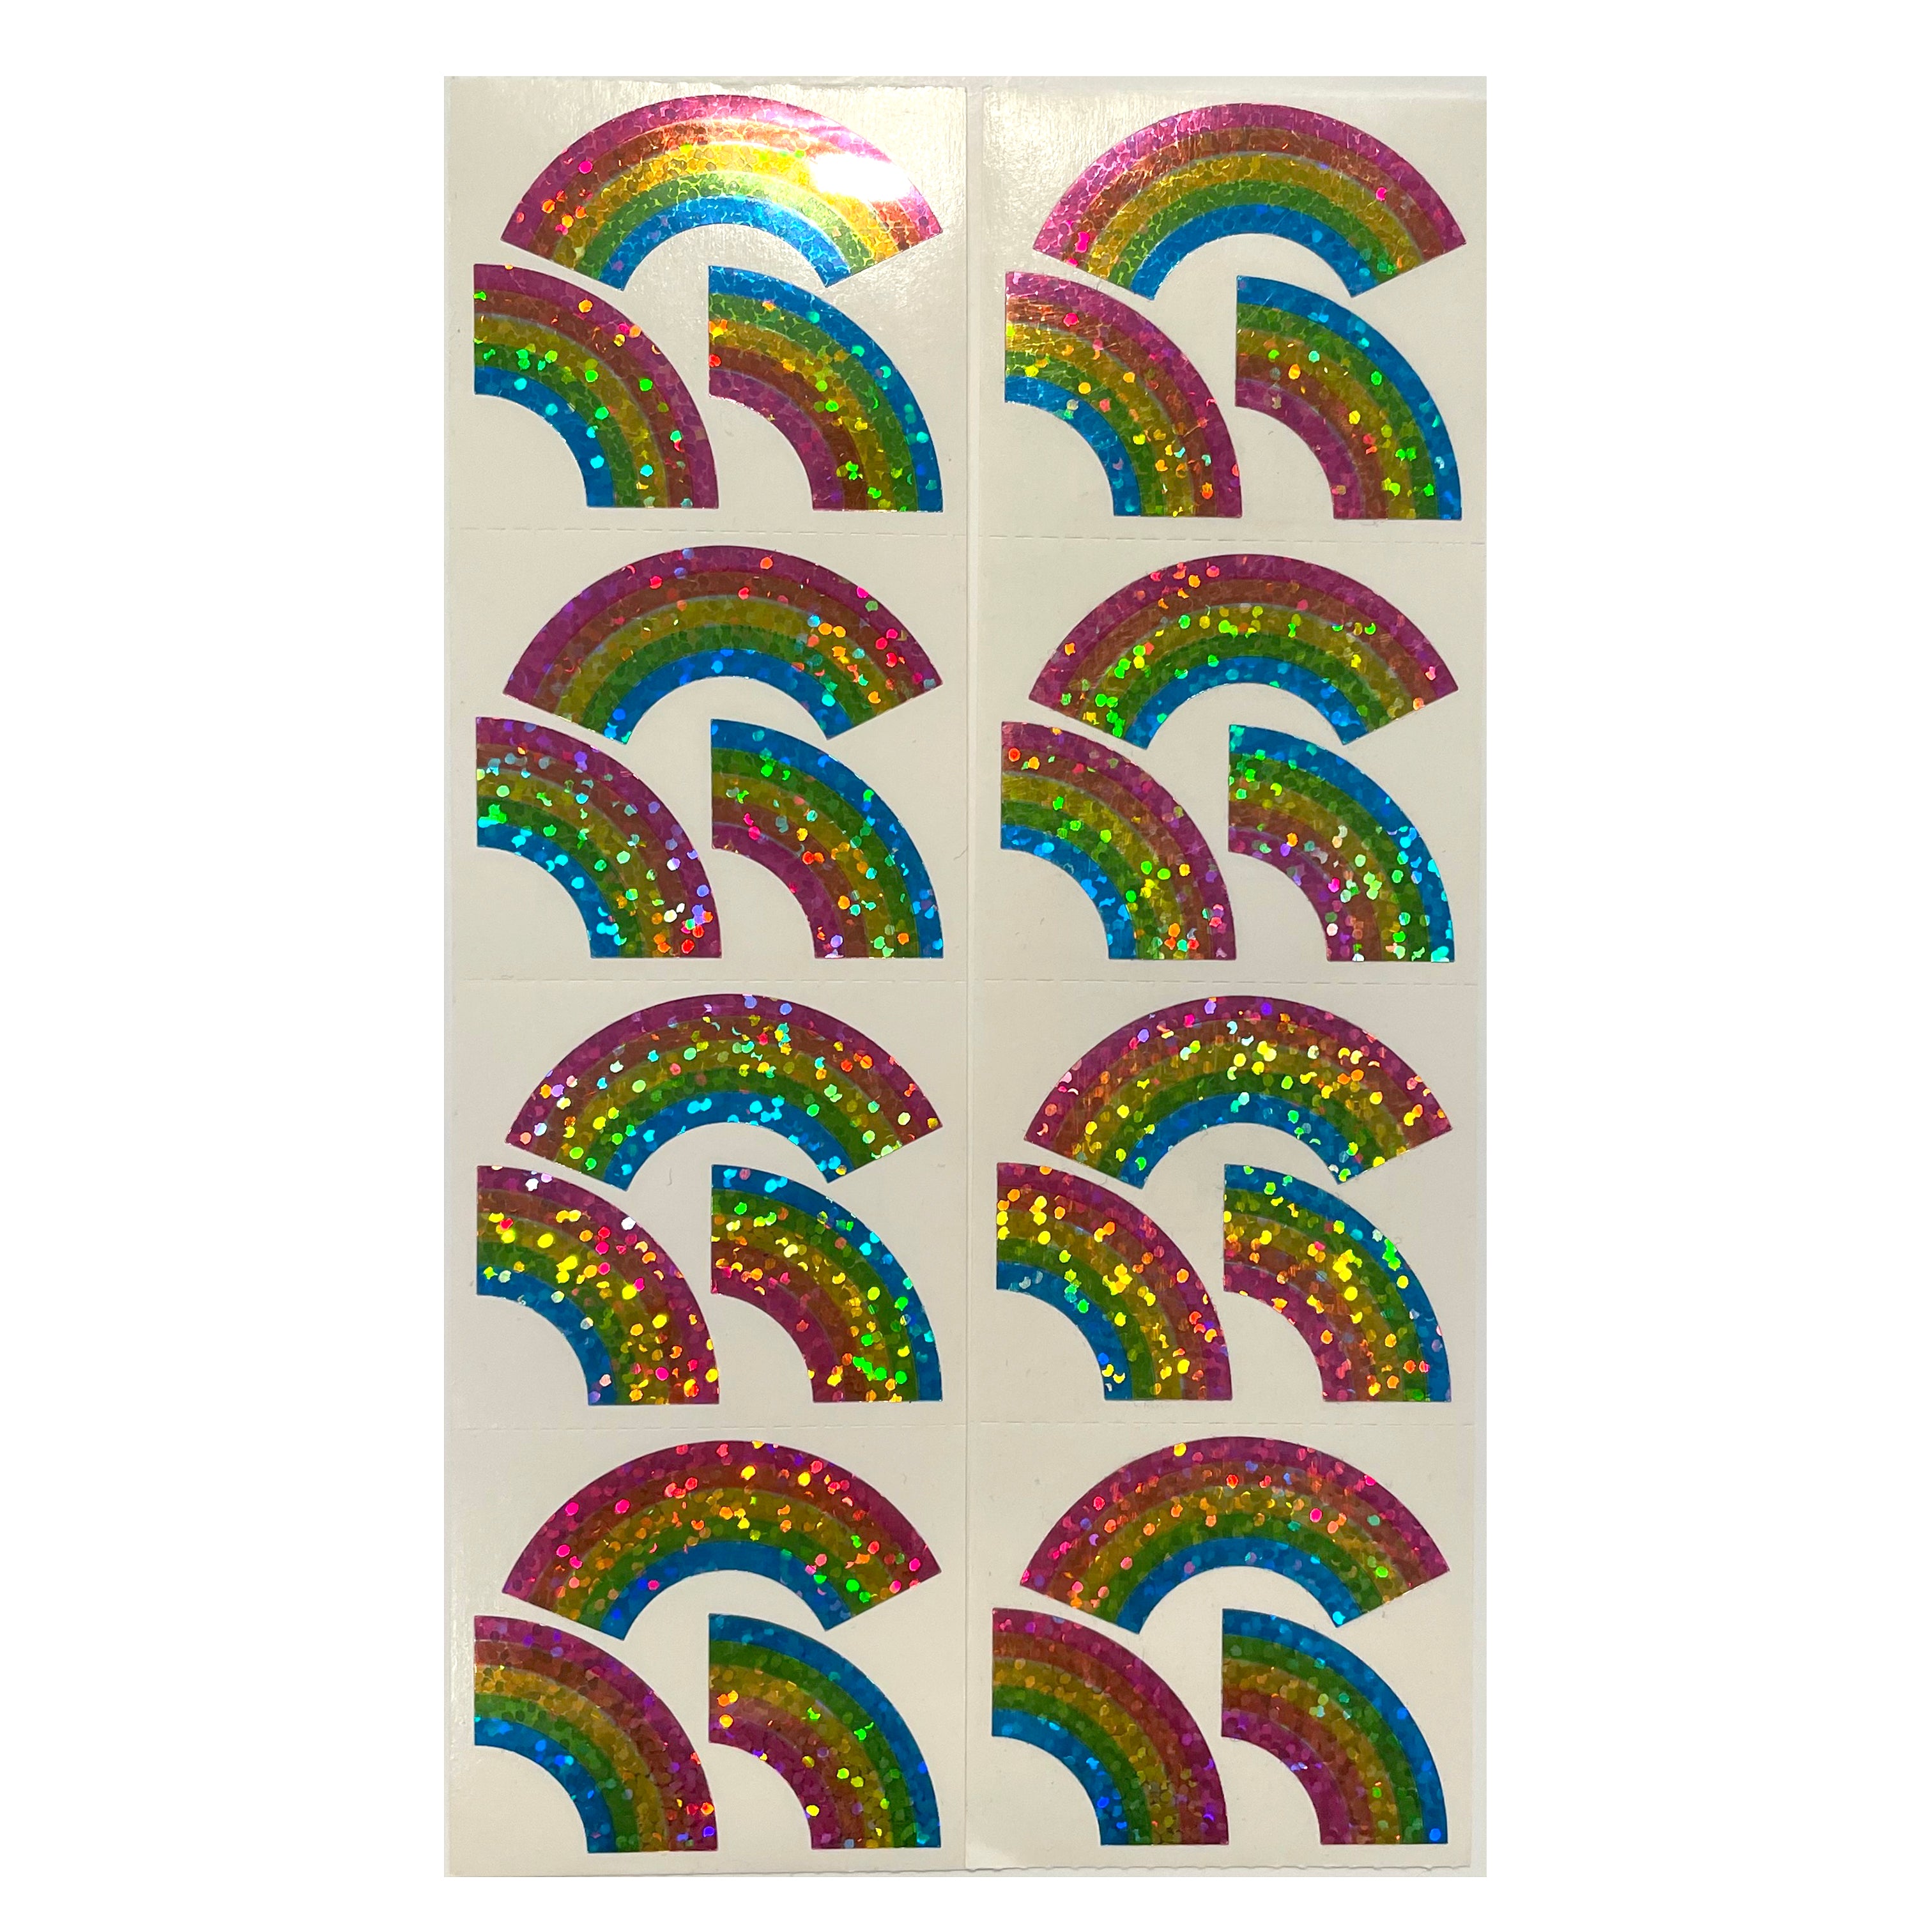 HAMBLY: Jumbo Red Heart glitter stickers – Sticker Stash Outlet